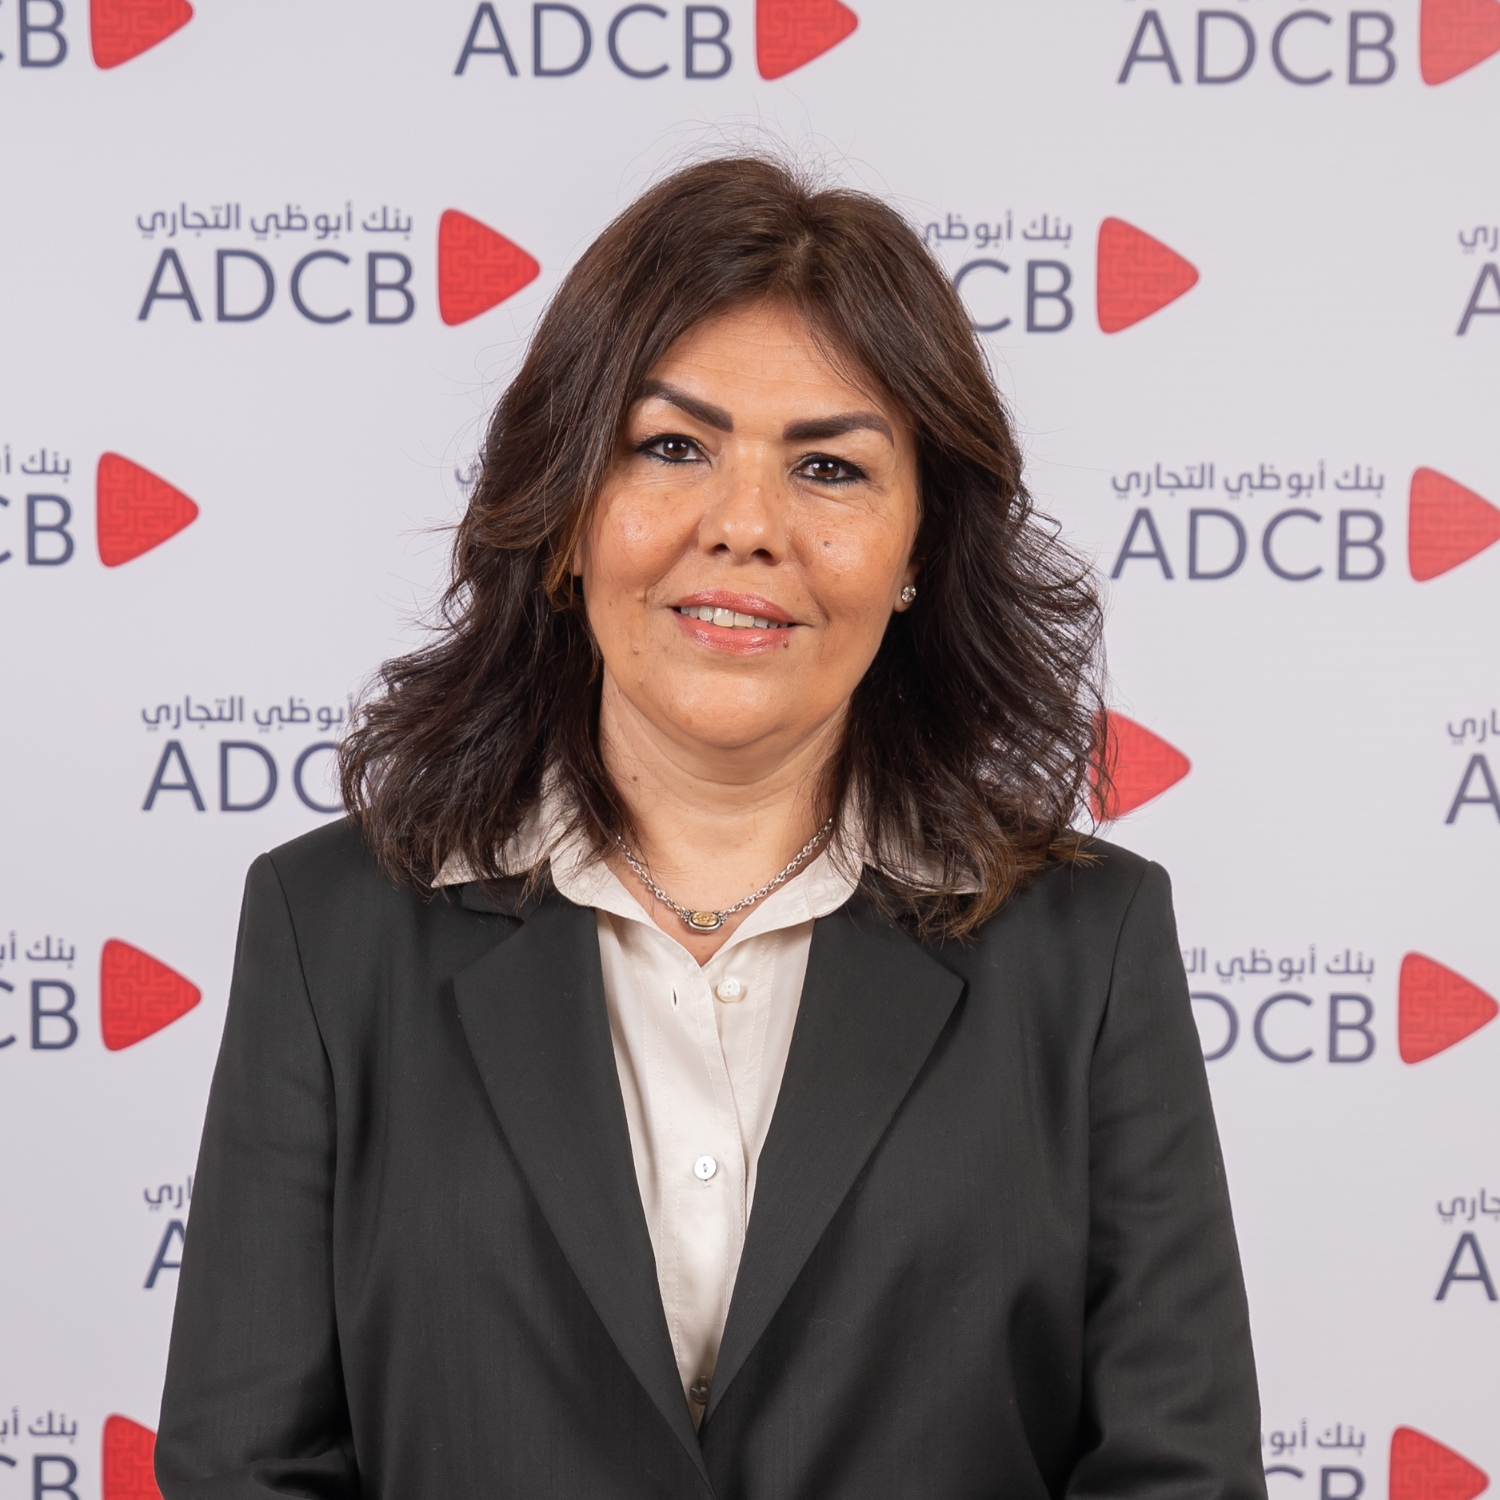 Dr. Ingy Badawy _ ADCB Egypt Member of the Board of Directors (Independent, Non-Executive)